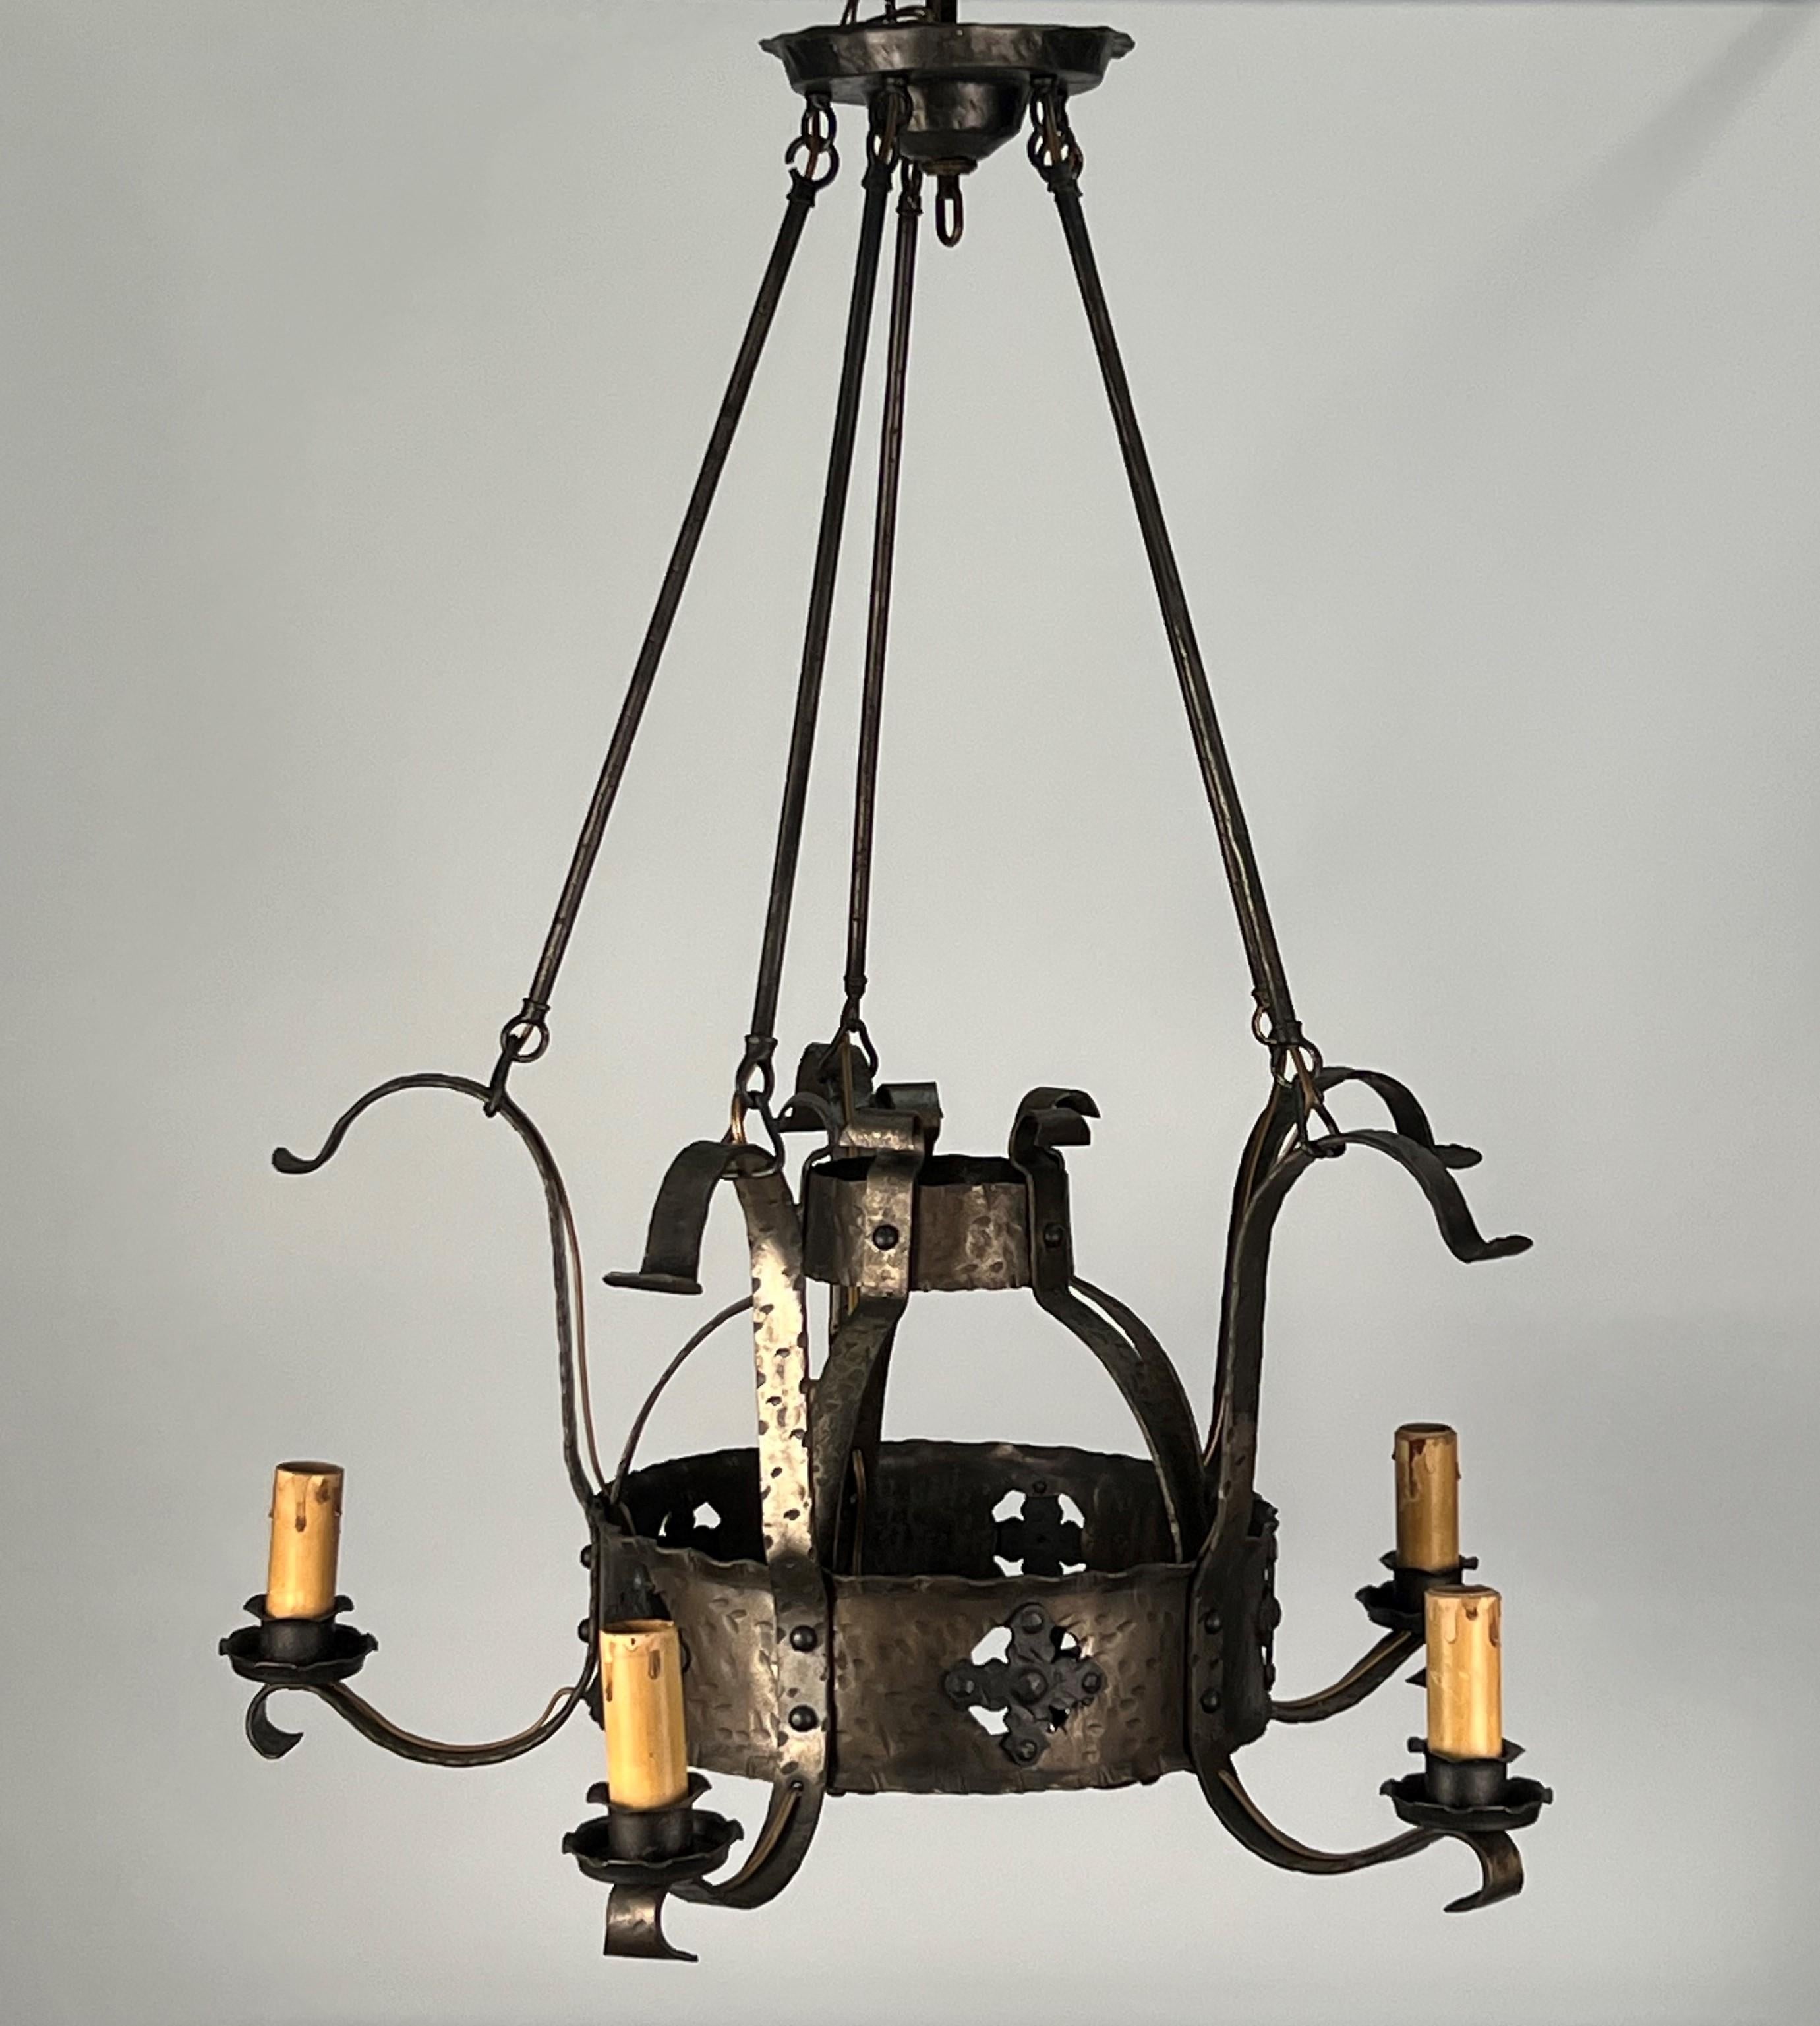 A rustic 1920's American wrought iron chandelier featuring five medium base candle sockets with original drip candle sleeves. Each of the candles are attached to a central steel strap by decorative flat iron curling supports. The interior features a